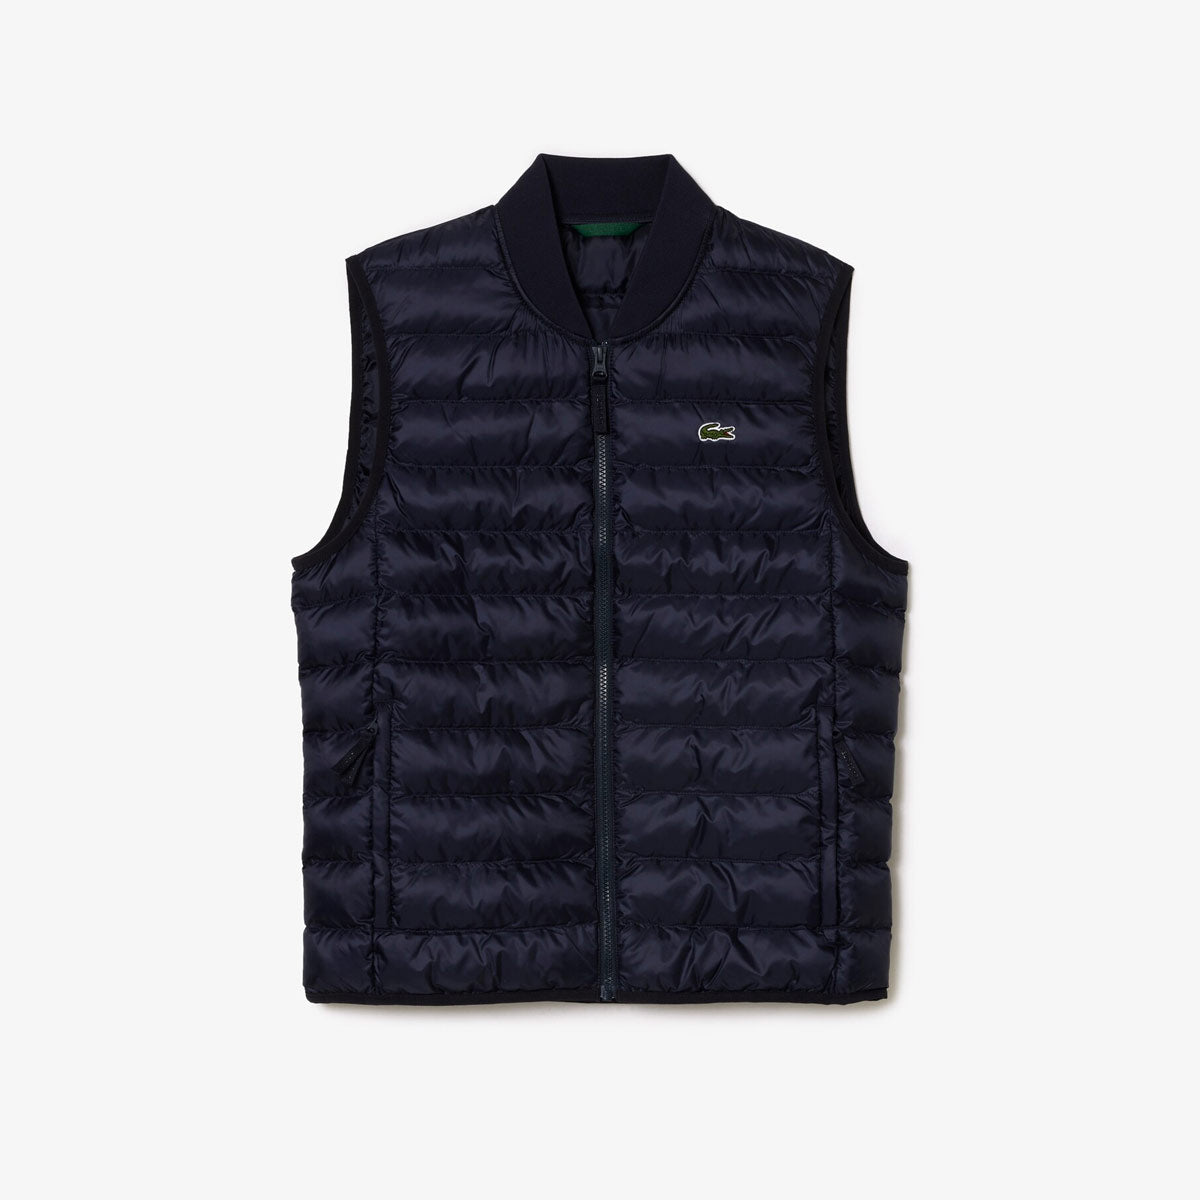 BH0537 AD HDE LACOSTE SLEEV LESS JACKET MEN NAVY